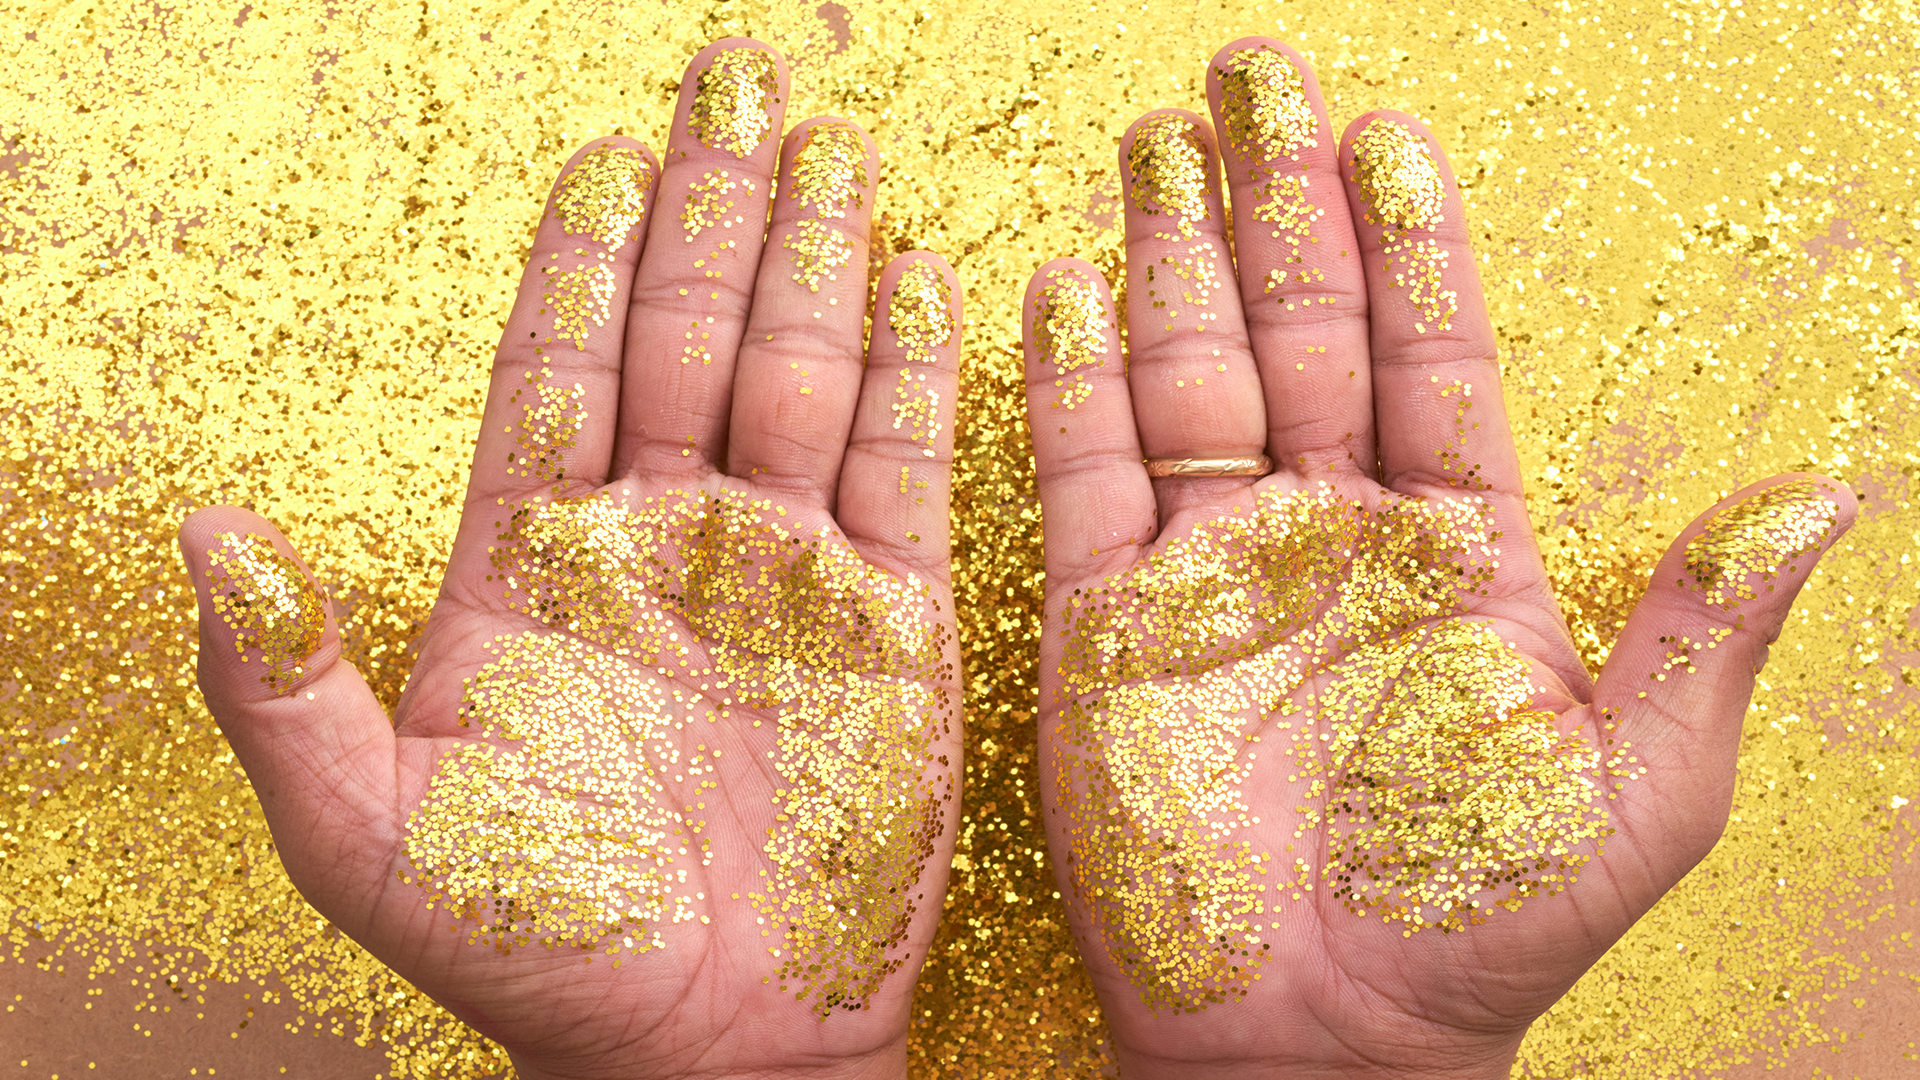 Hands with glitter all over them